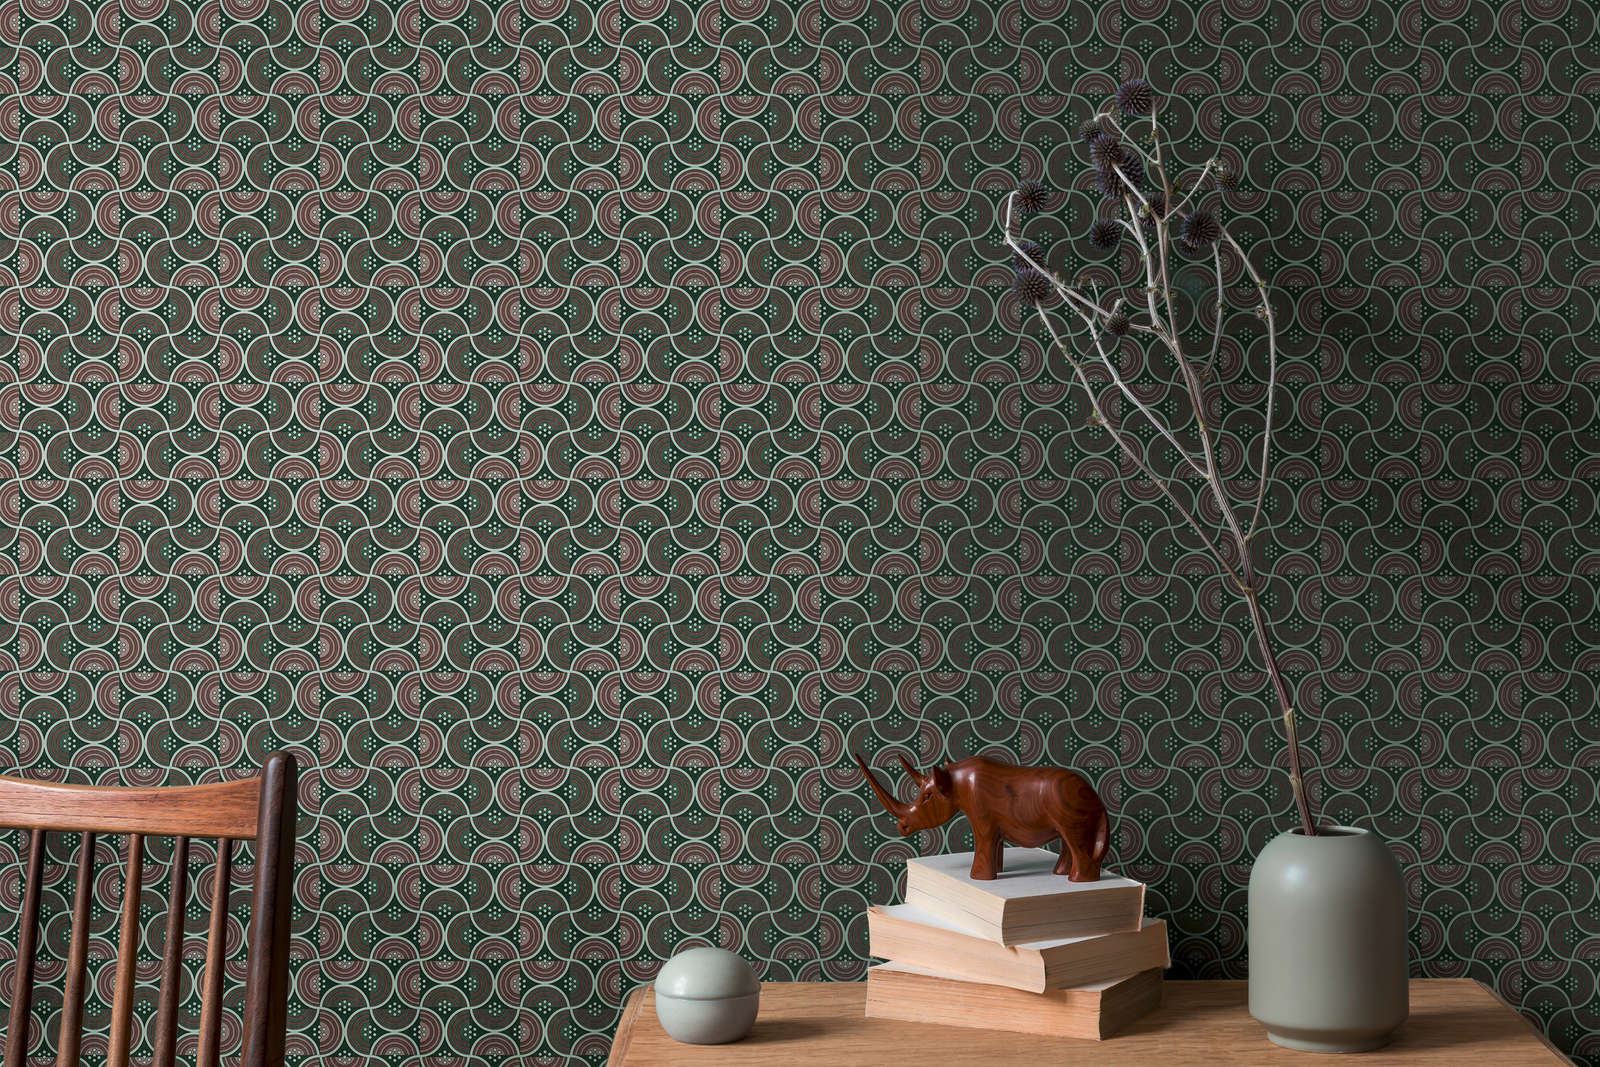             Non-woven wallpaper with dots and semicircles geometric pattern - red, green, black
        